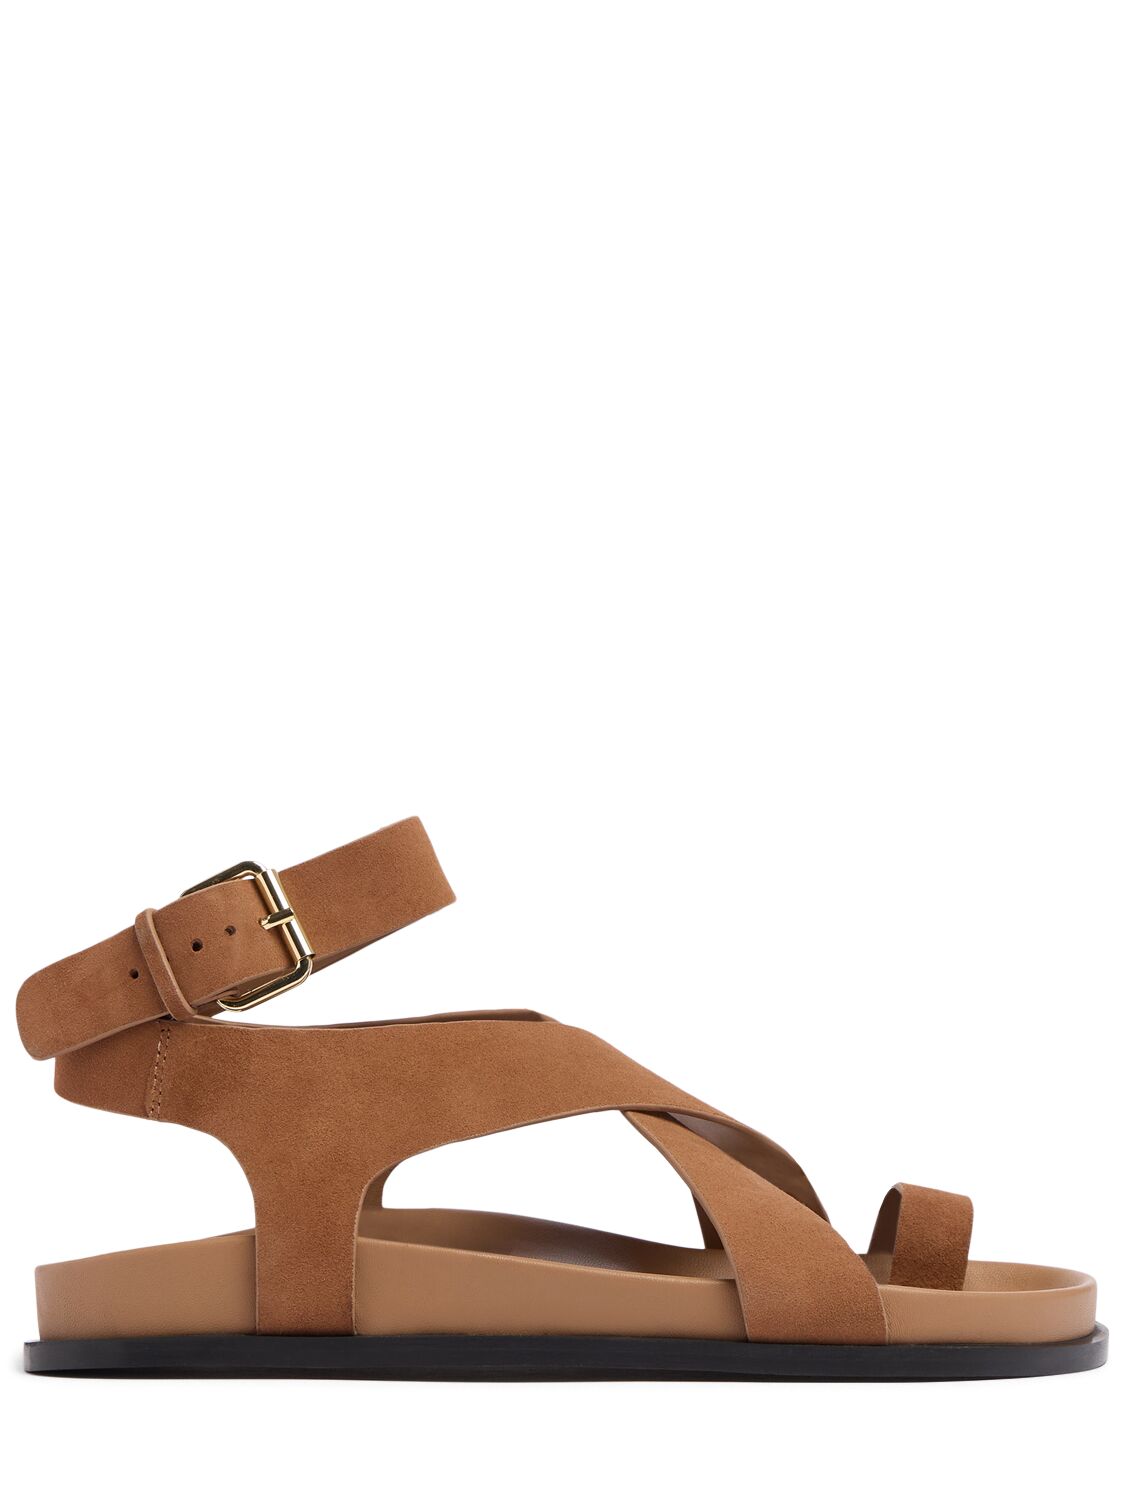 A.emery Jalen Suede Sandals In Camel